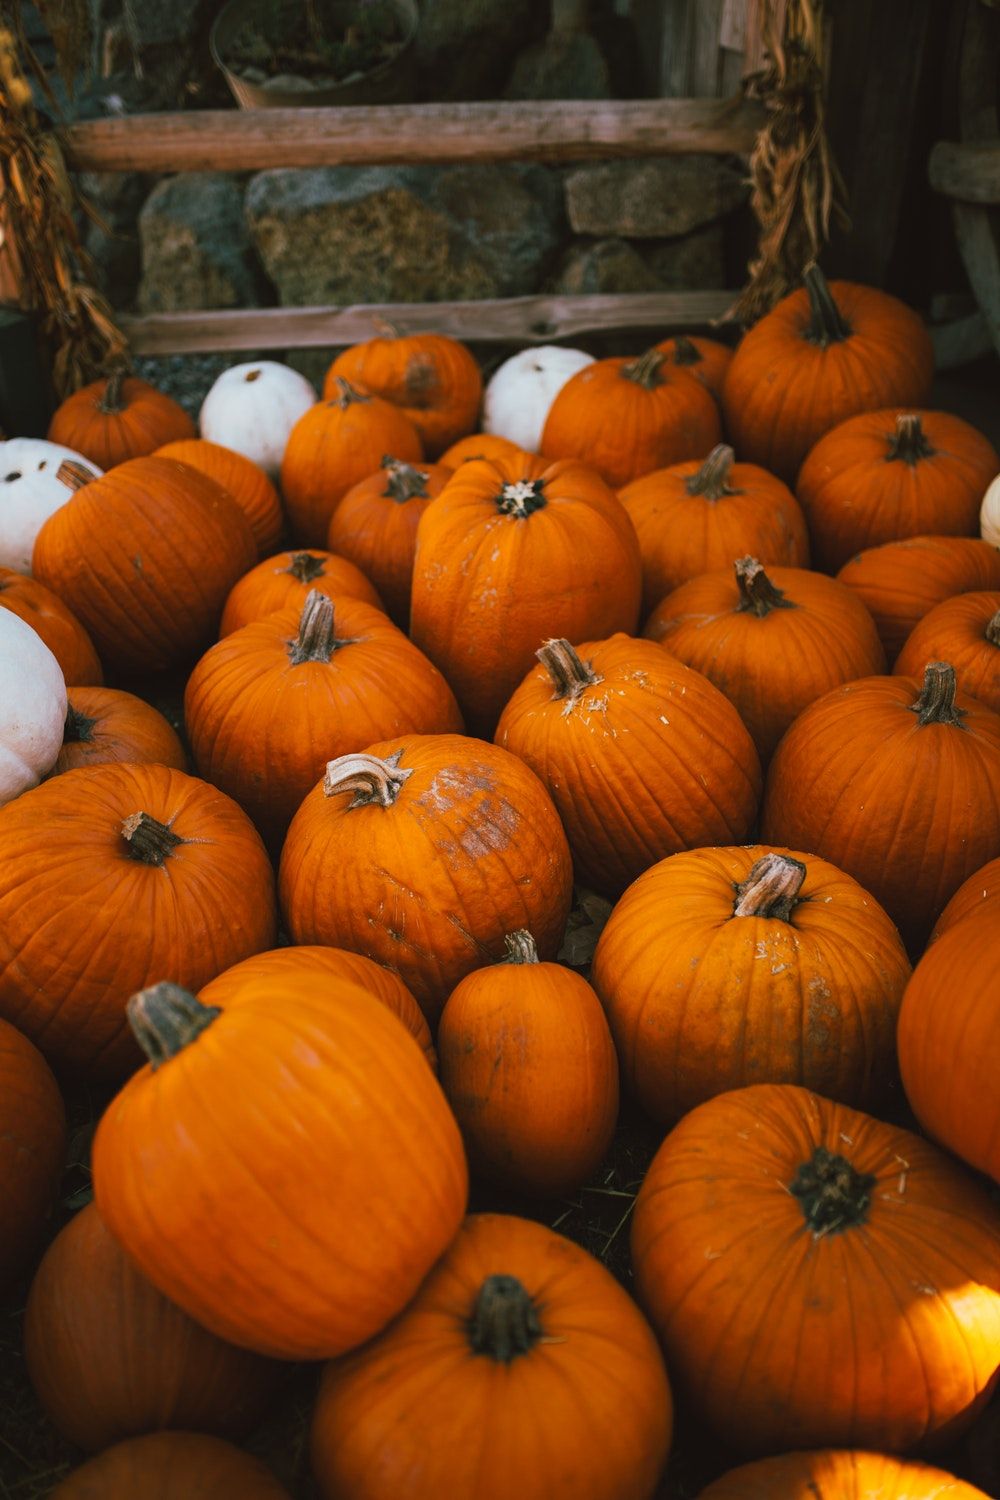 Free download Fall Wallpaper With Pumpkins 30 Background Picture [1000x1500] for your Desktop, Mobile & Tablet. Explore Pumkin Wallpaper. Free Pumpkin Wallpaper, Halloween Pumpkin Wallpaper, Great Pumpkin Wallpaper